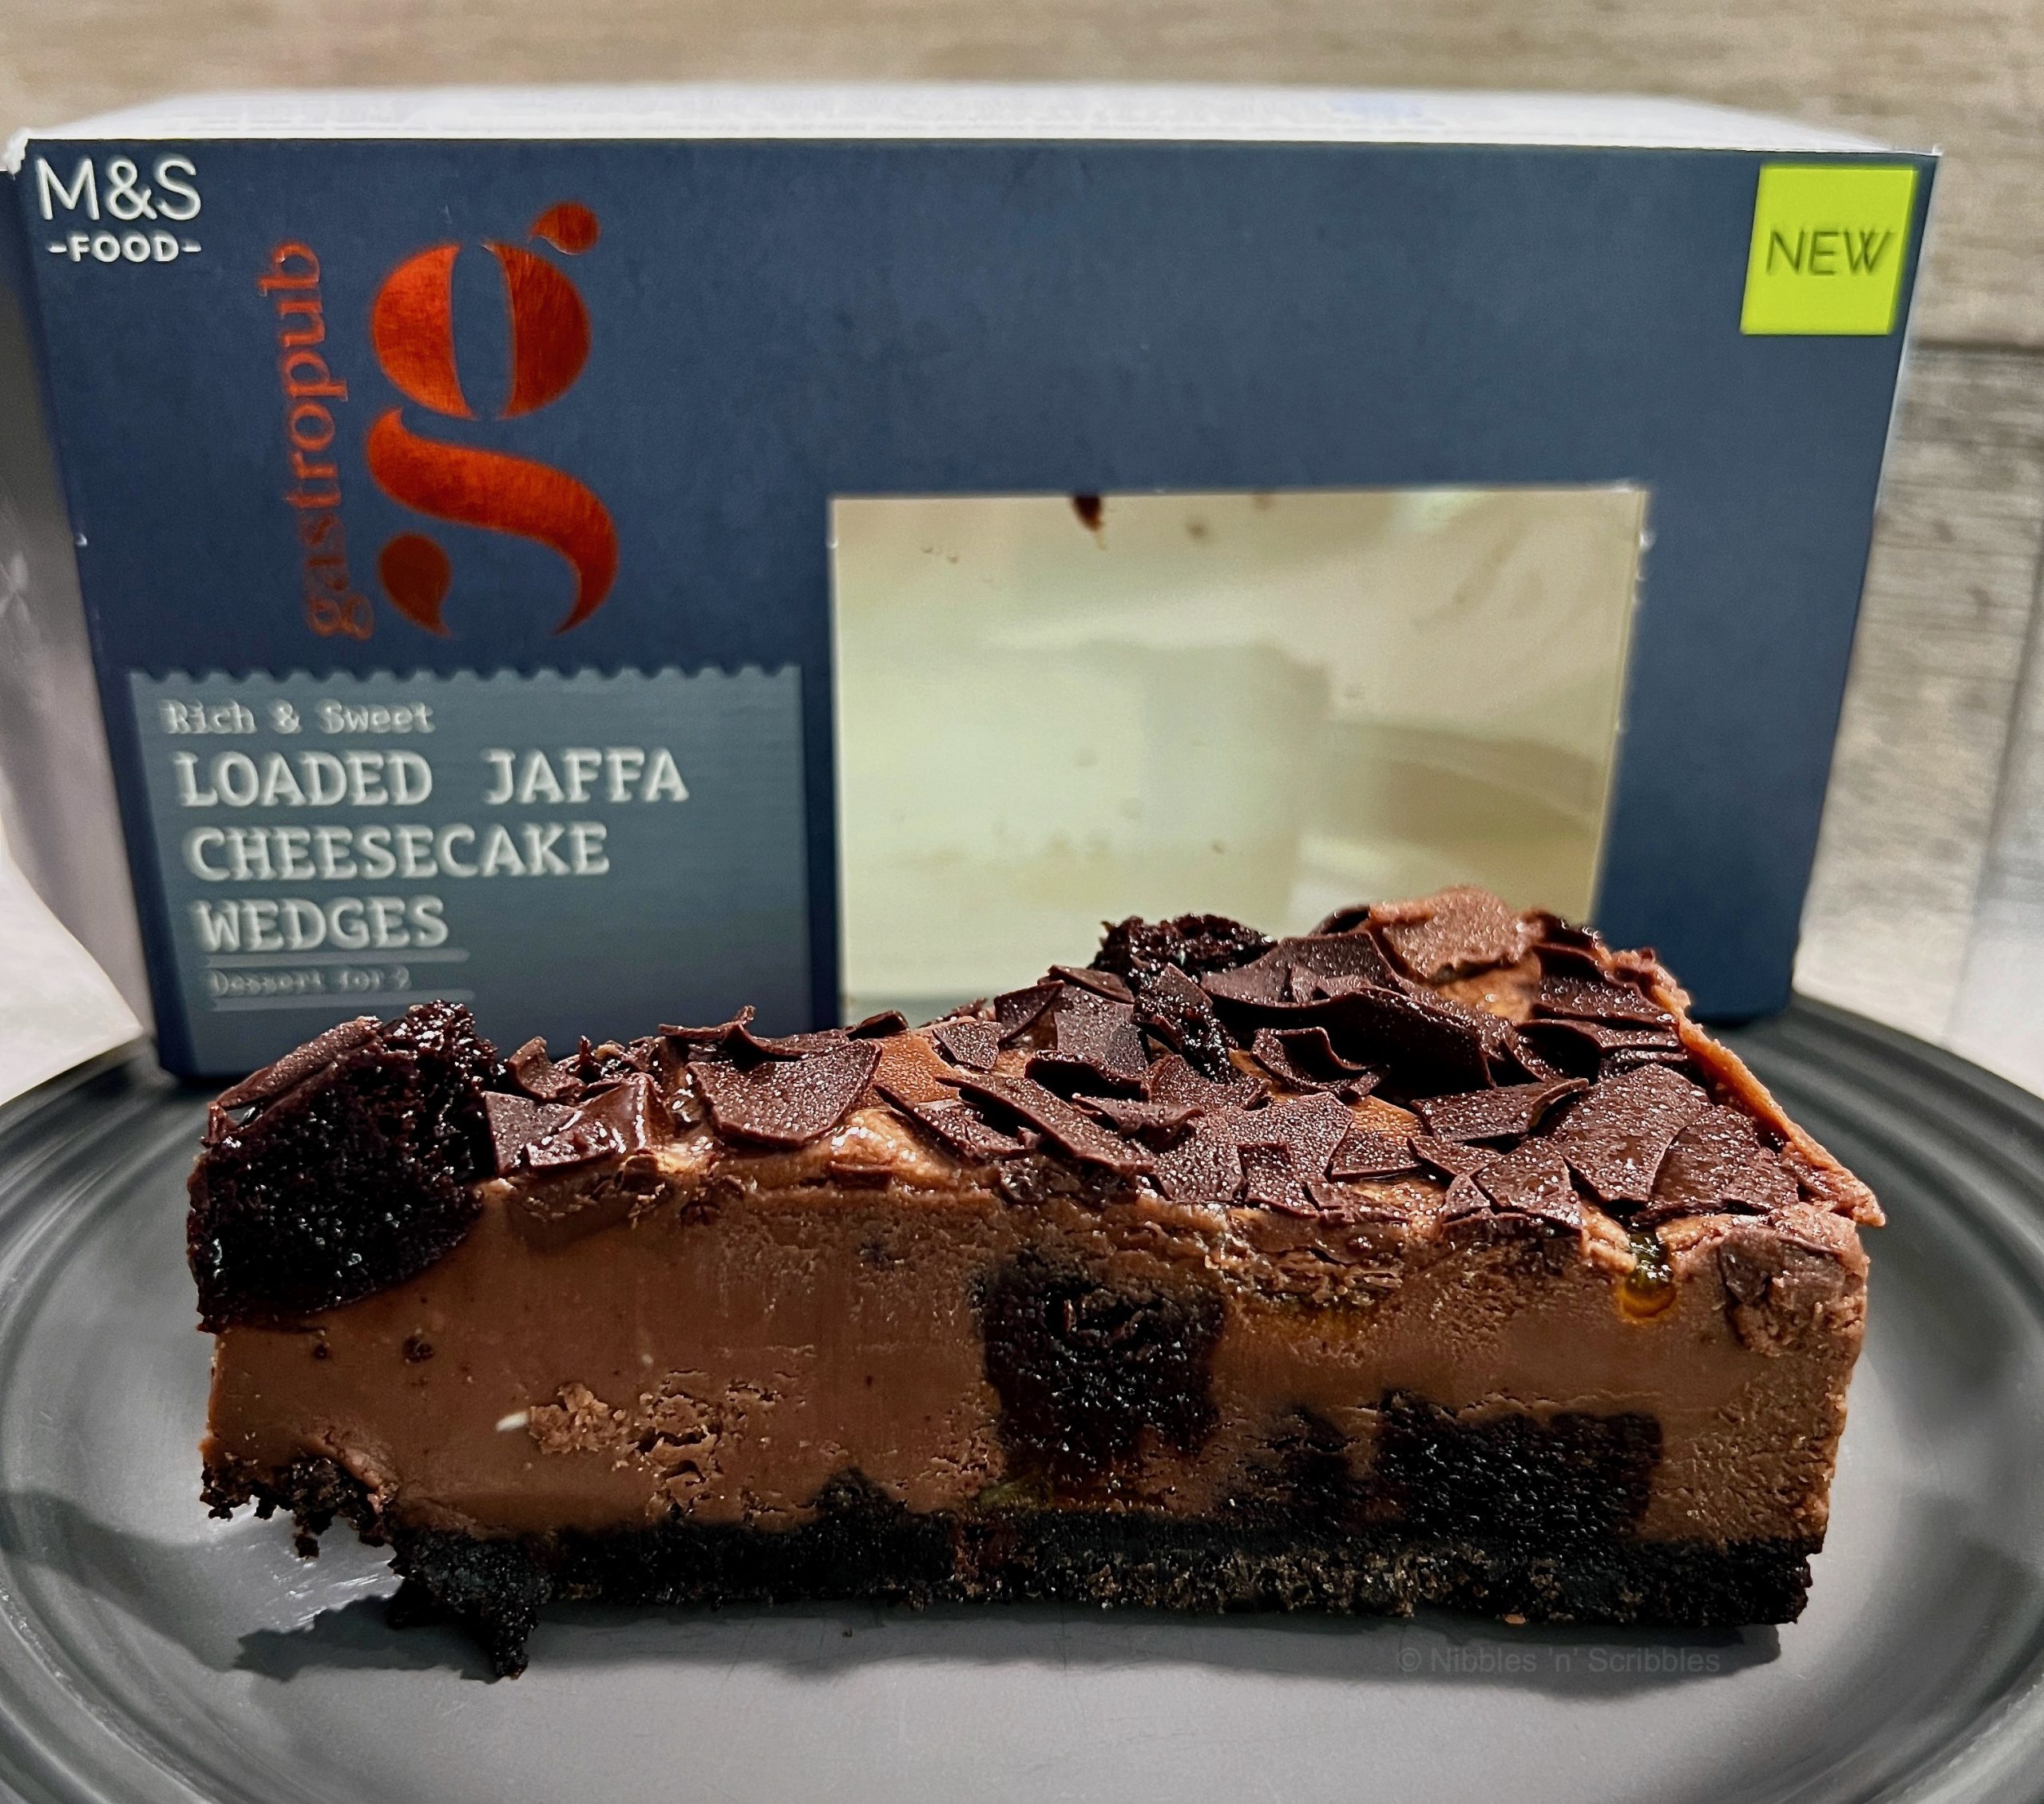 M&S Loaded Jaffa Cheesecake Wedges Review